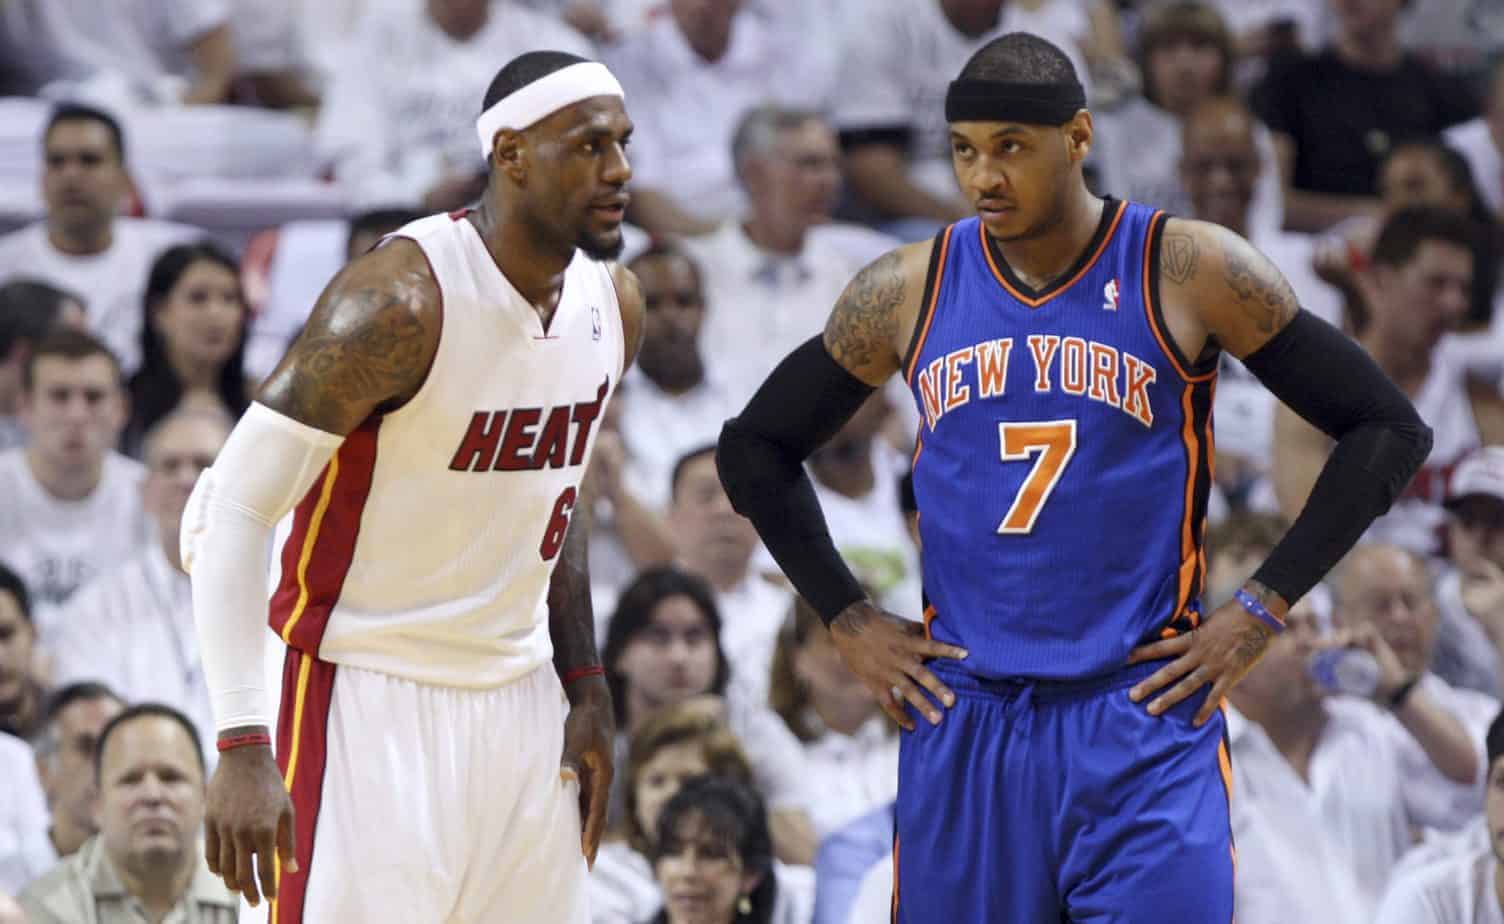 Carmelo Anthony revealed what LeBron James told him during to recruitment pitch to get him to the Los Angeles Lakers this offseason